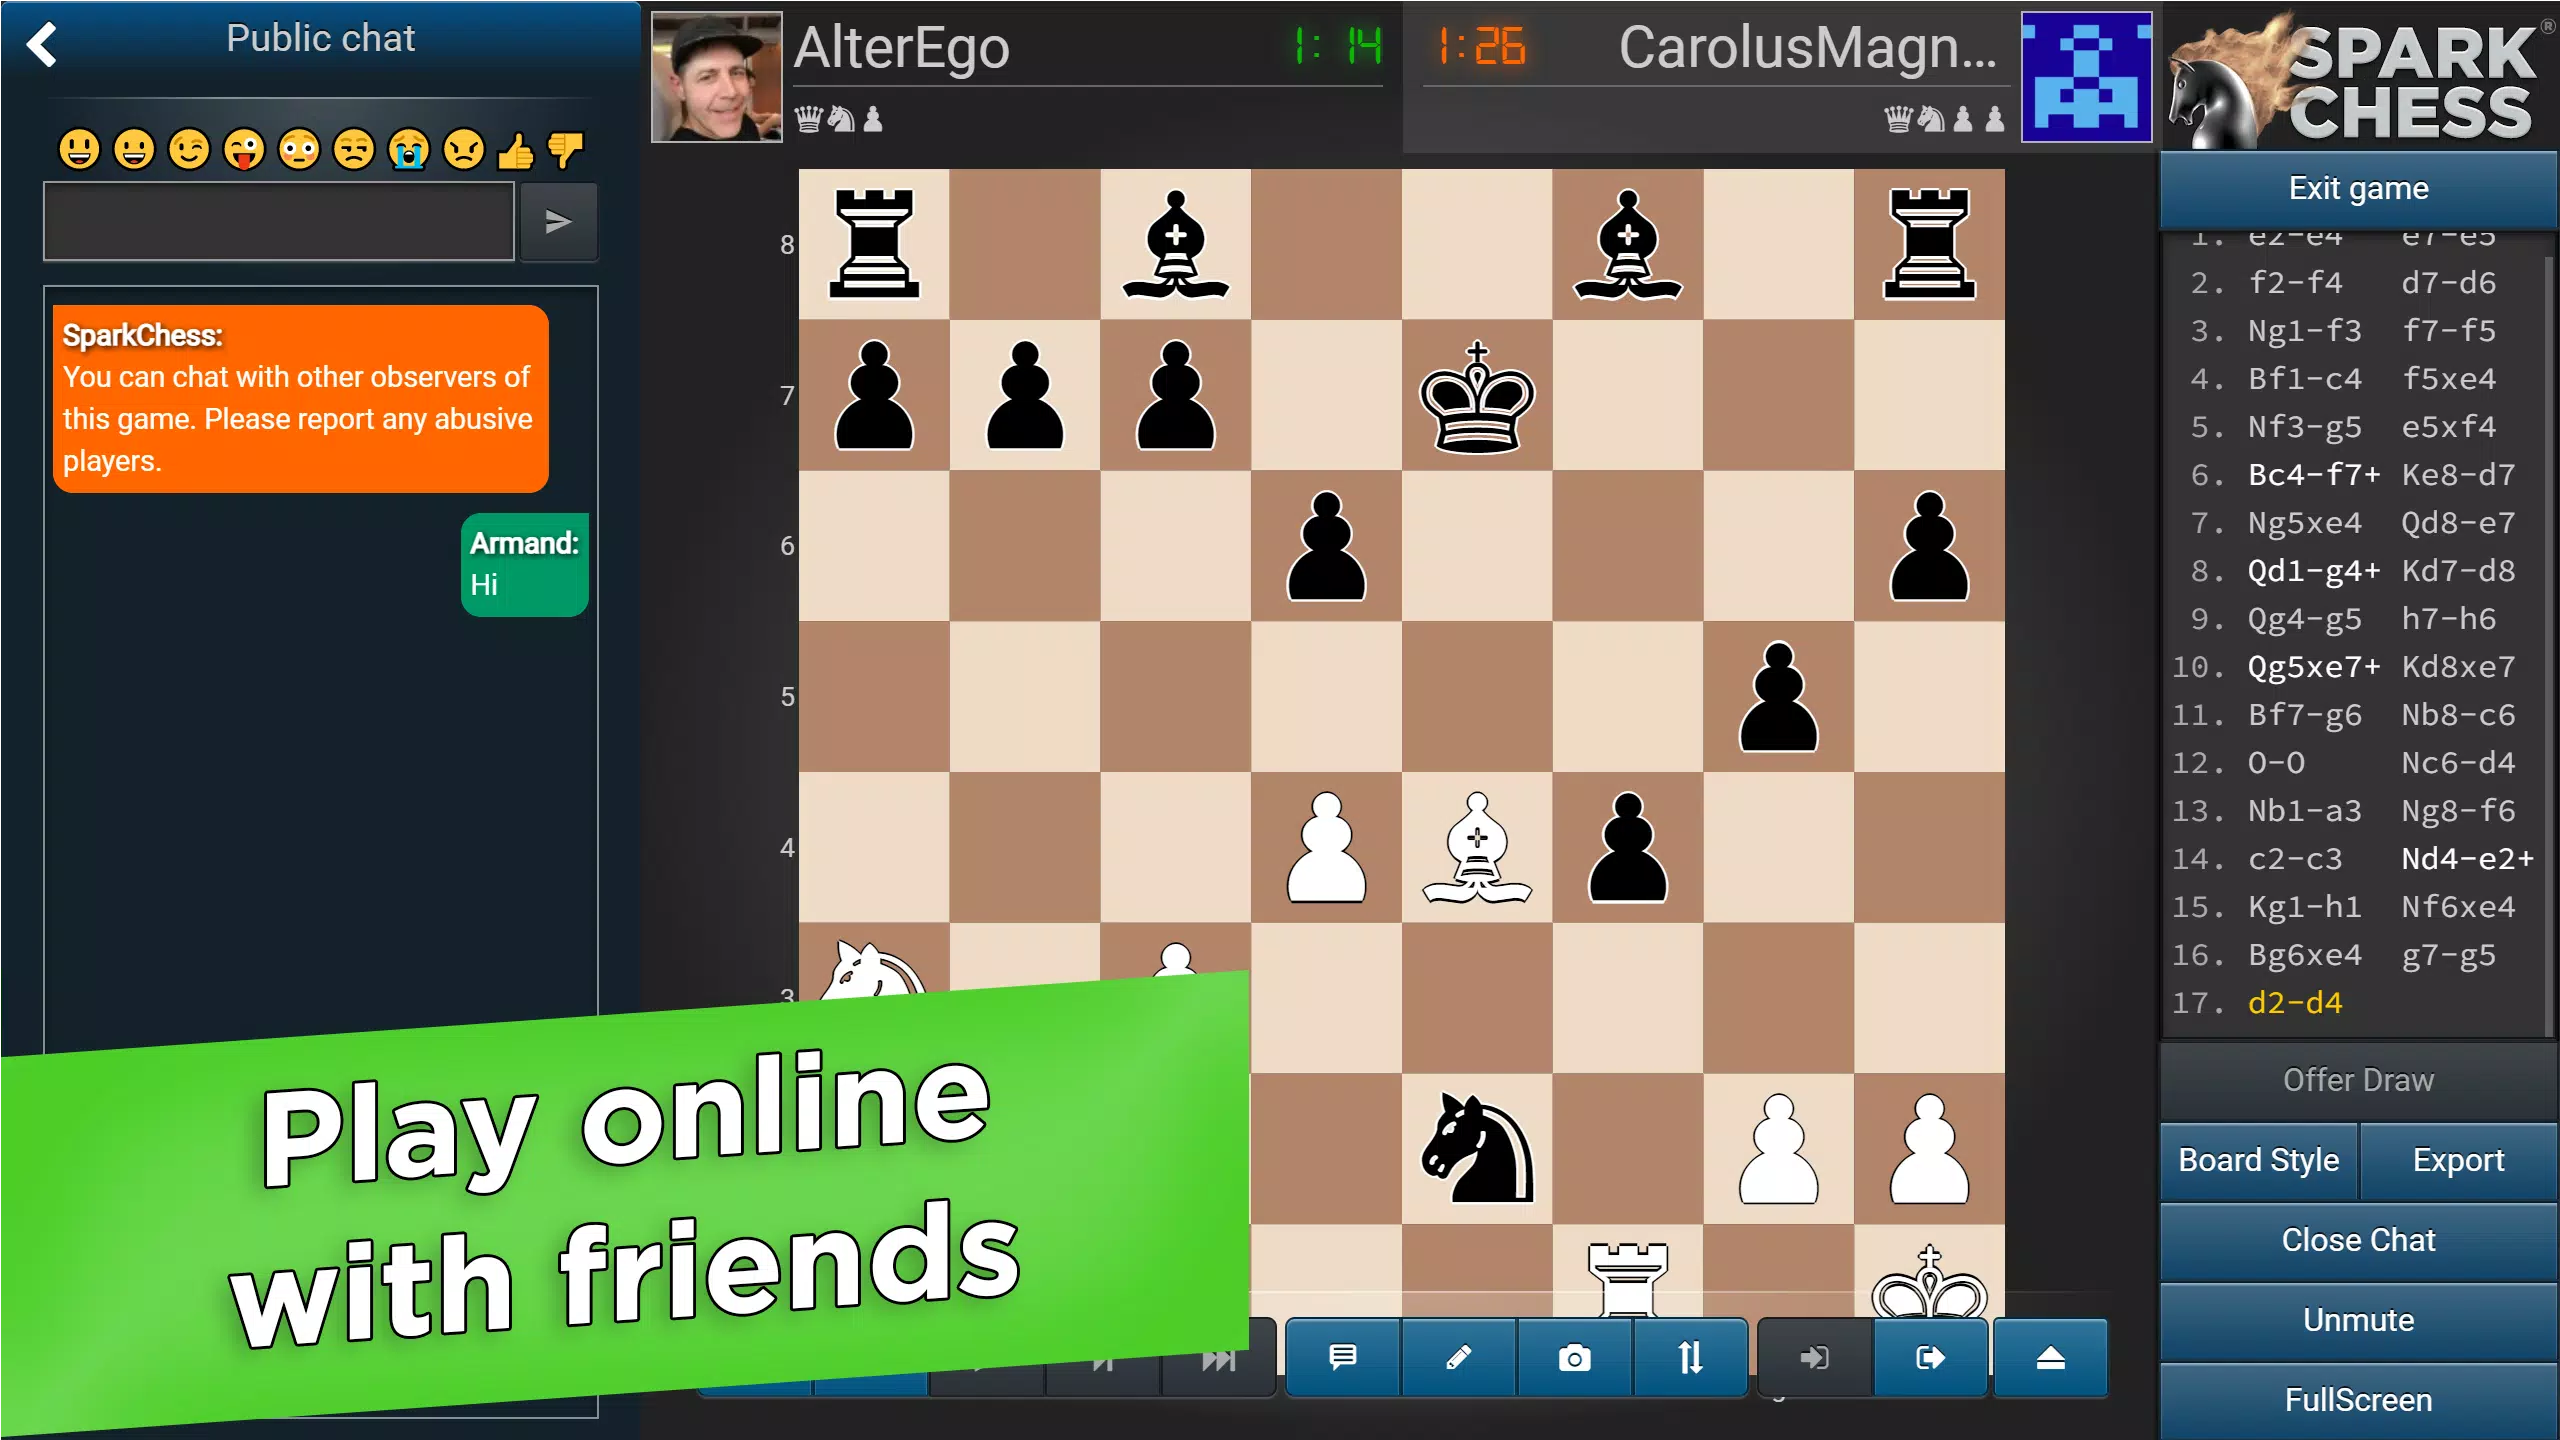 SparkChess Pro 15.0.0 Apk for Android - Apkses